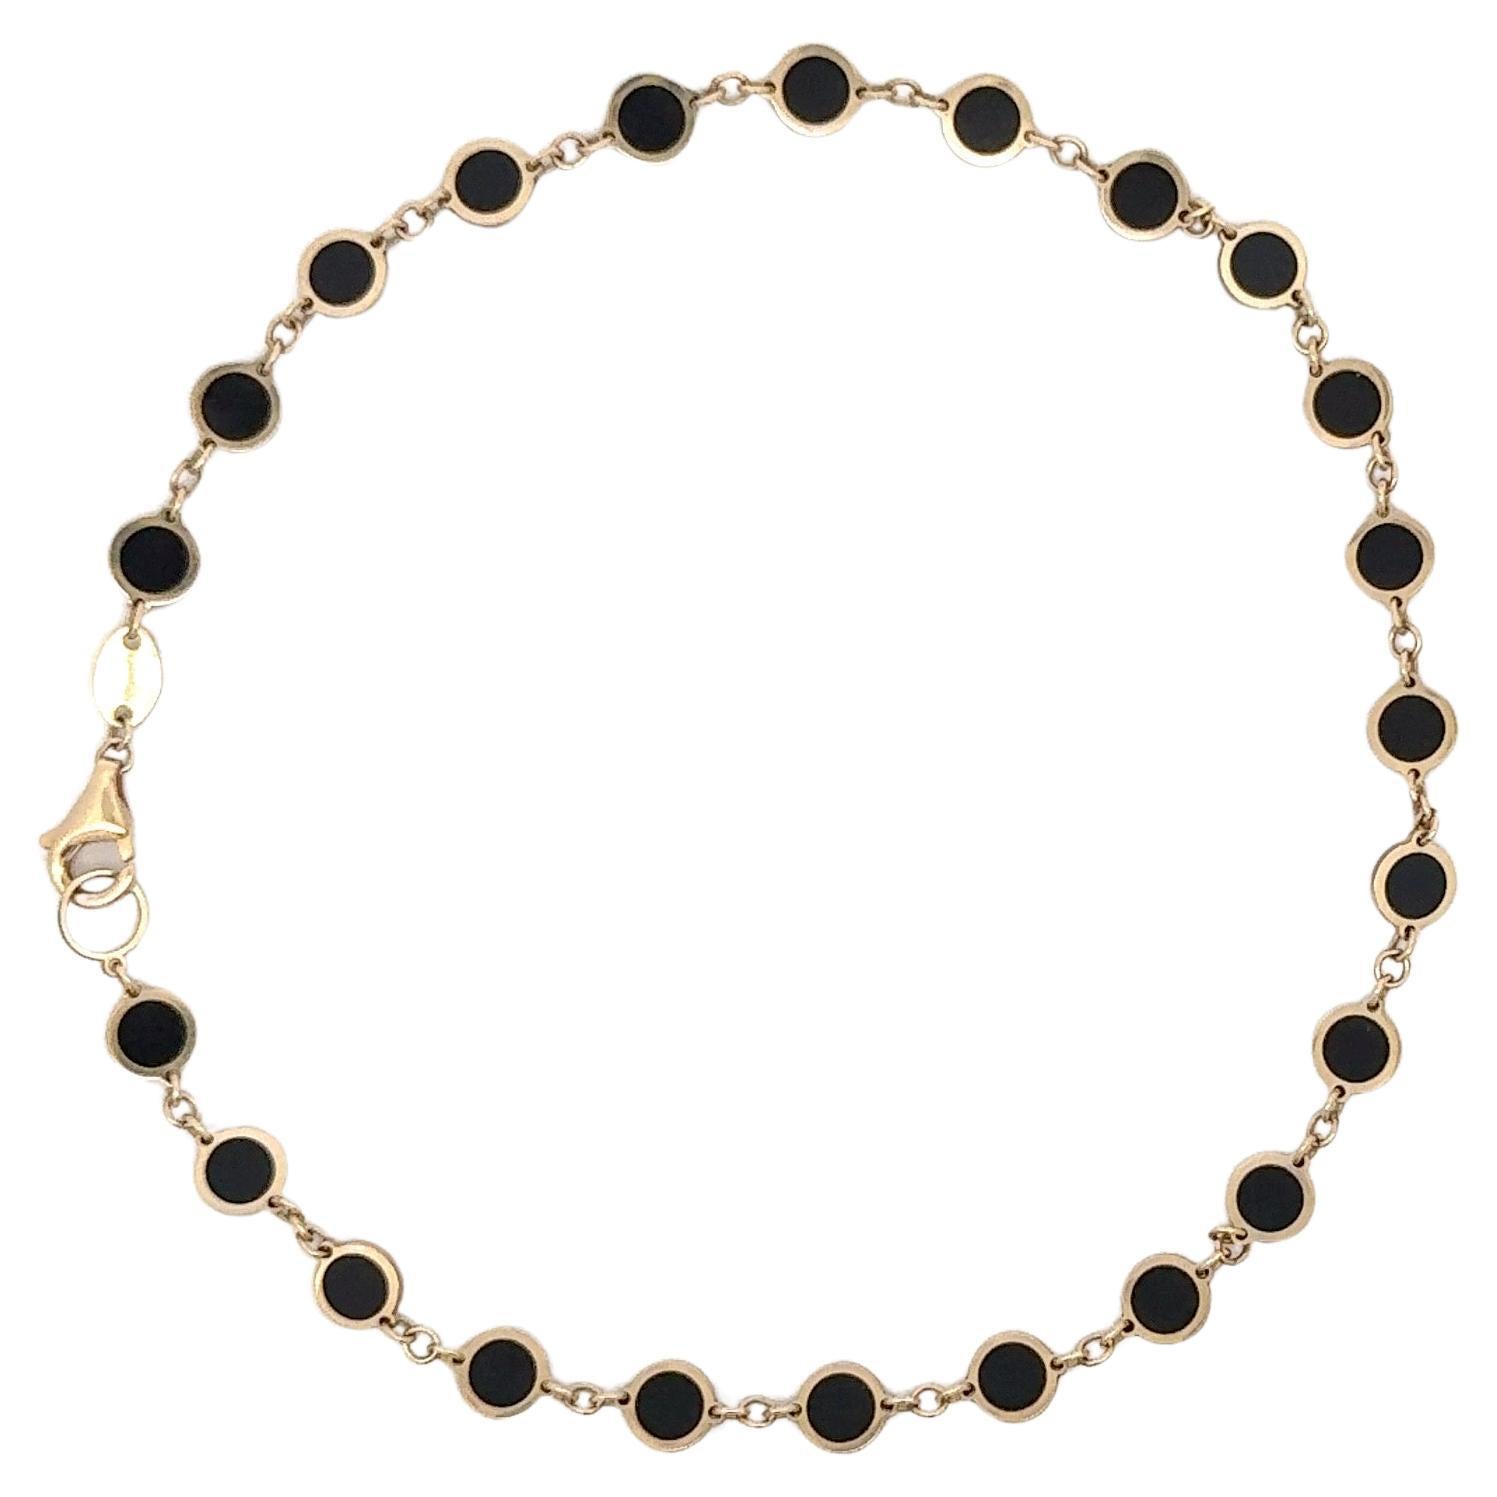 Italian made, this 14 karat yellow gold anklet features black enamel disc links weighing 3.1 grams.
Available in different colors & shapes
DM for more info